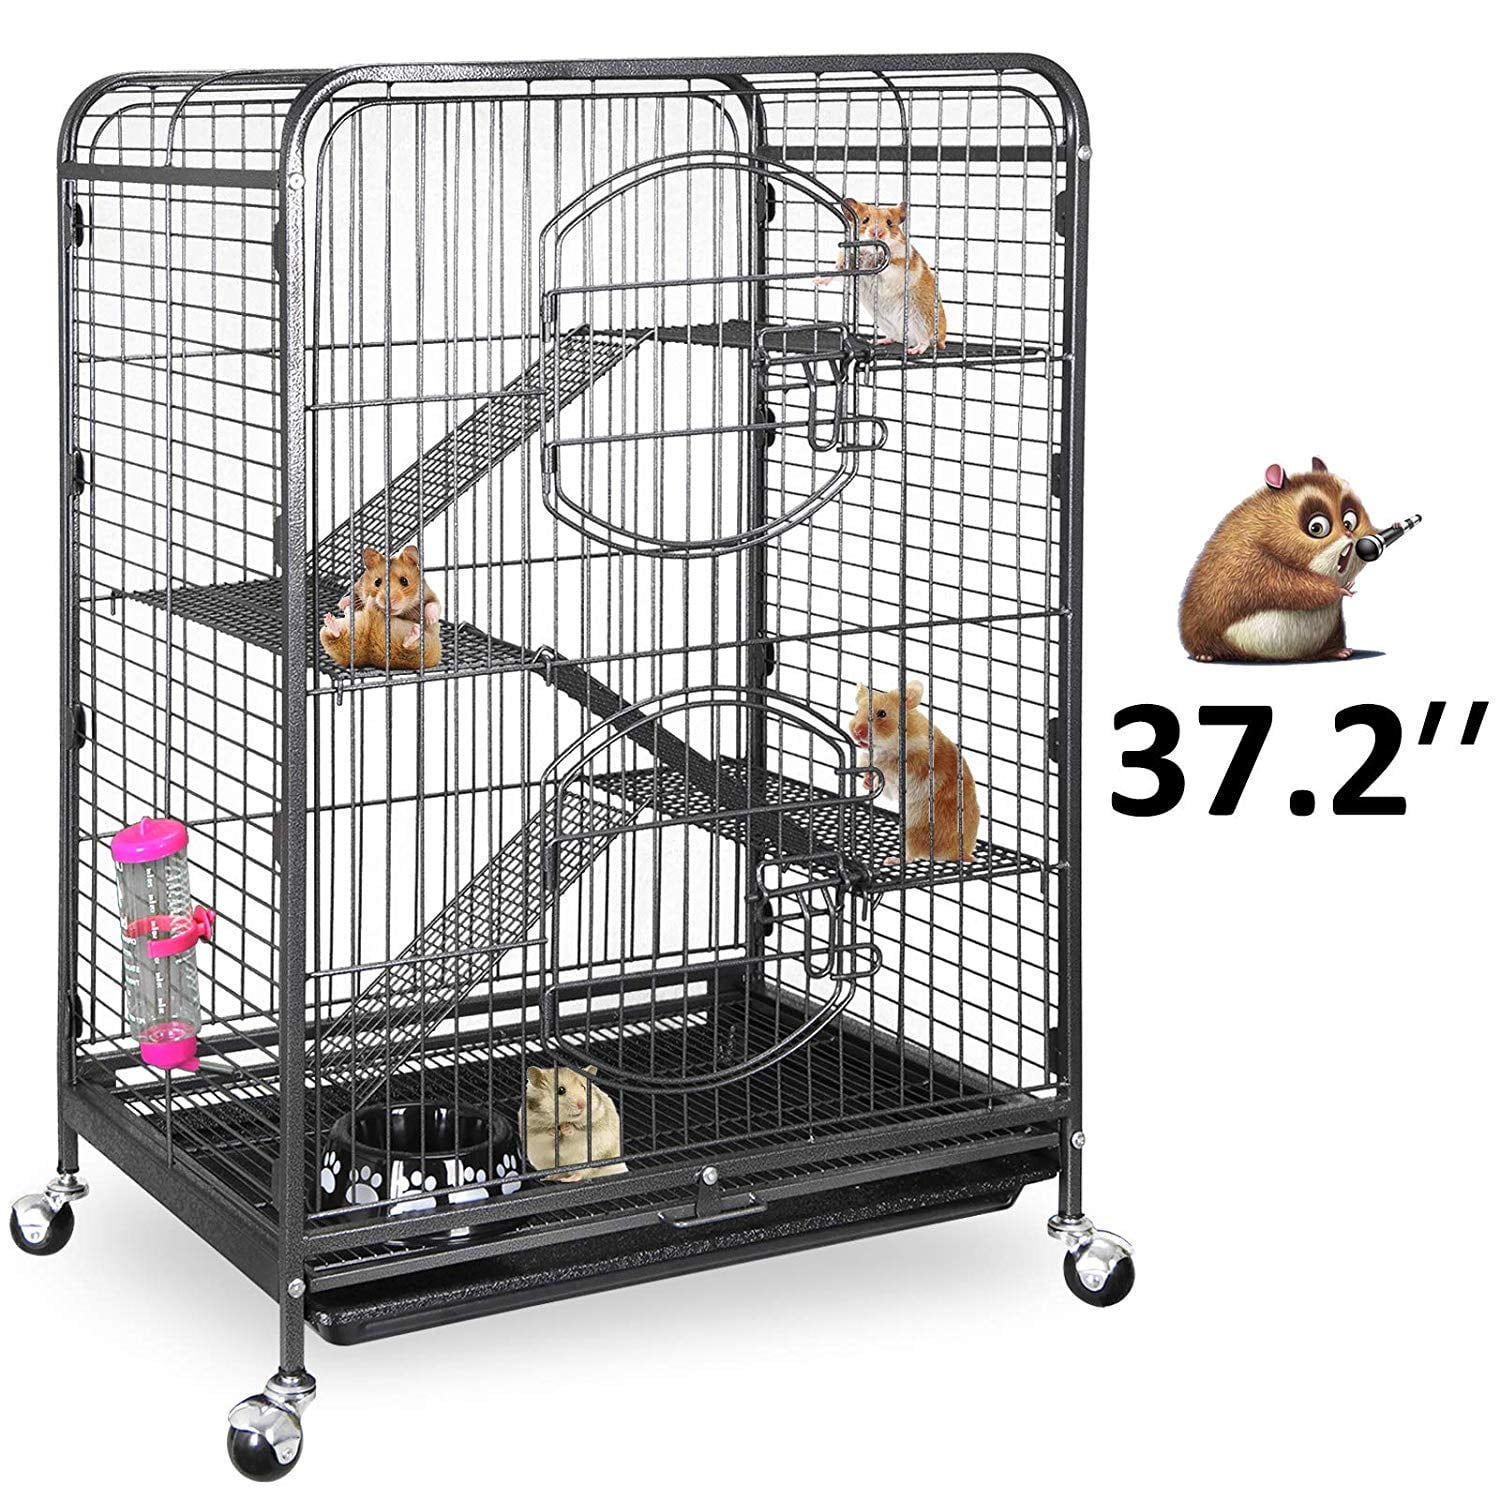 White GOTOTOP 52 5 Layers Iron Rabbit Ferret Cage with 3 Big Front Doors Guinea Pig Chinchilla Rat Indoor Pet Small Animal House Indoor Home Bunny Playpen